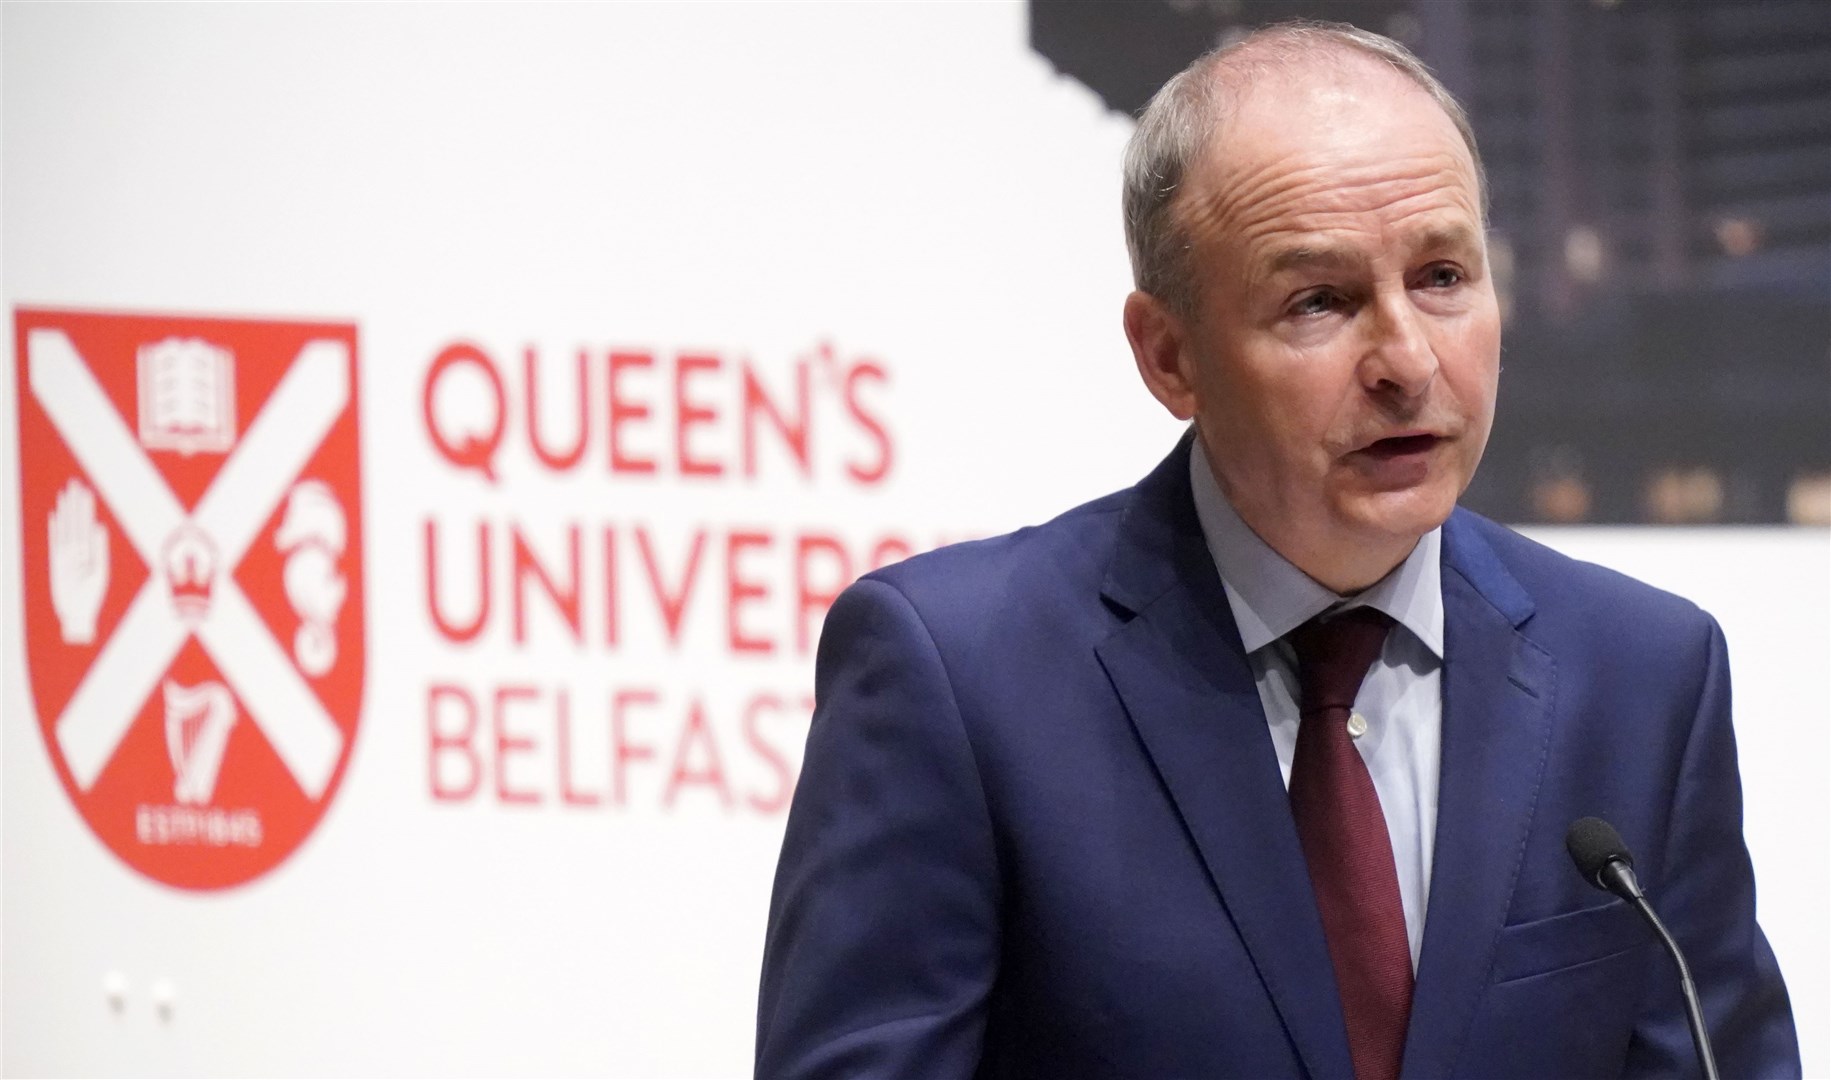 Micheal Martin speaking during the conference at Queen’s University Belfast (Niall Carson/PA)